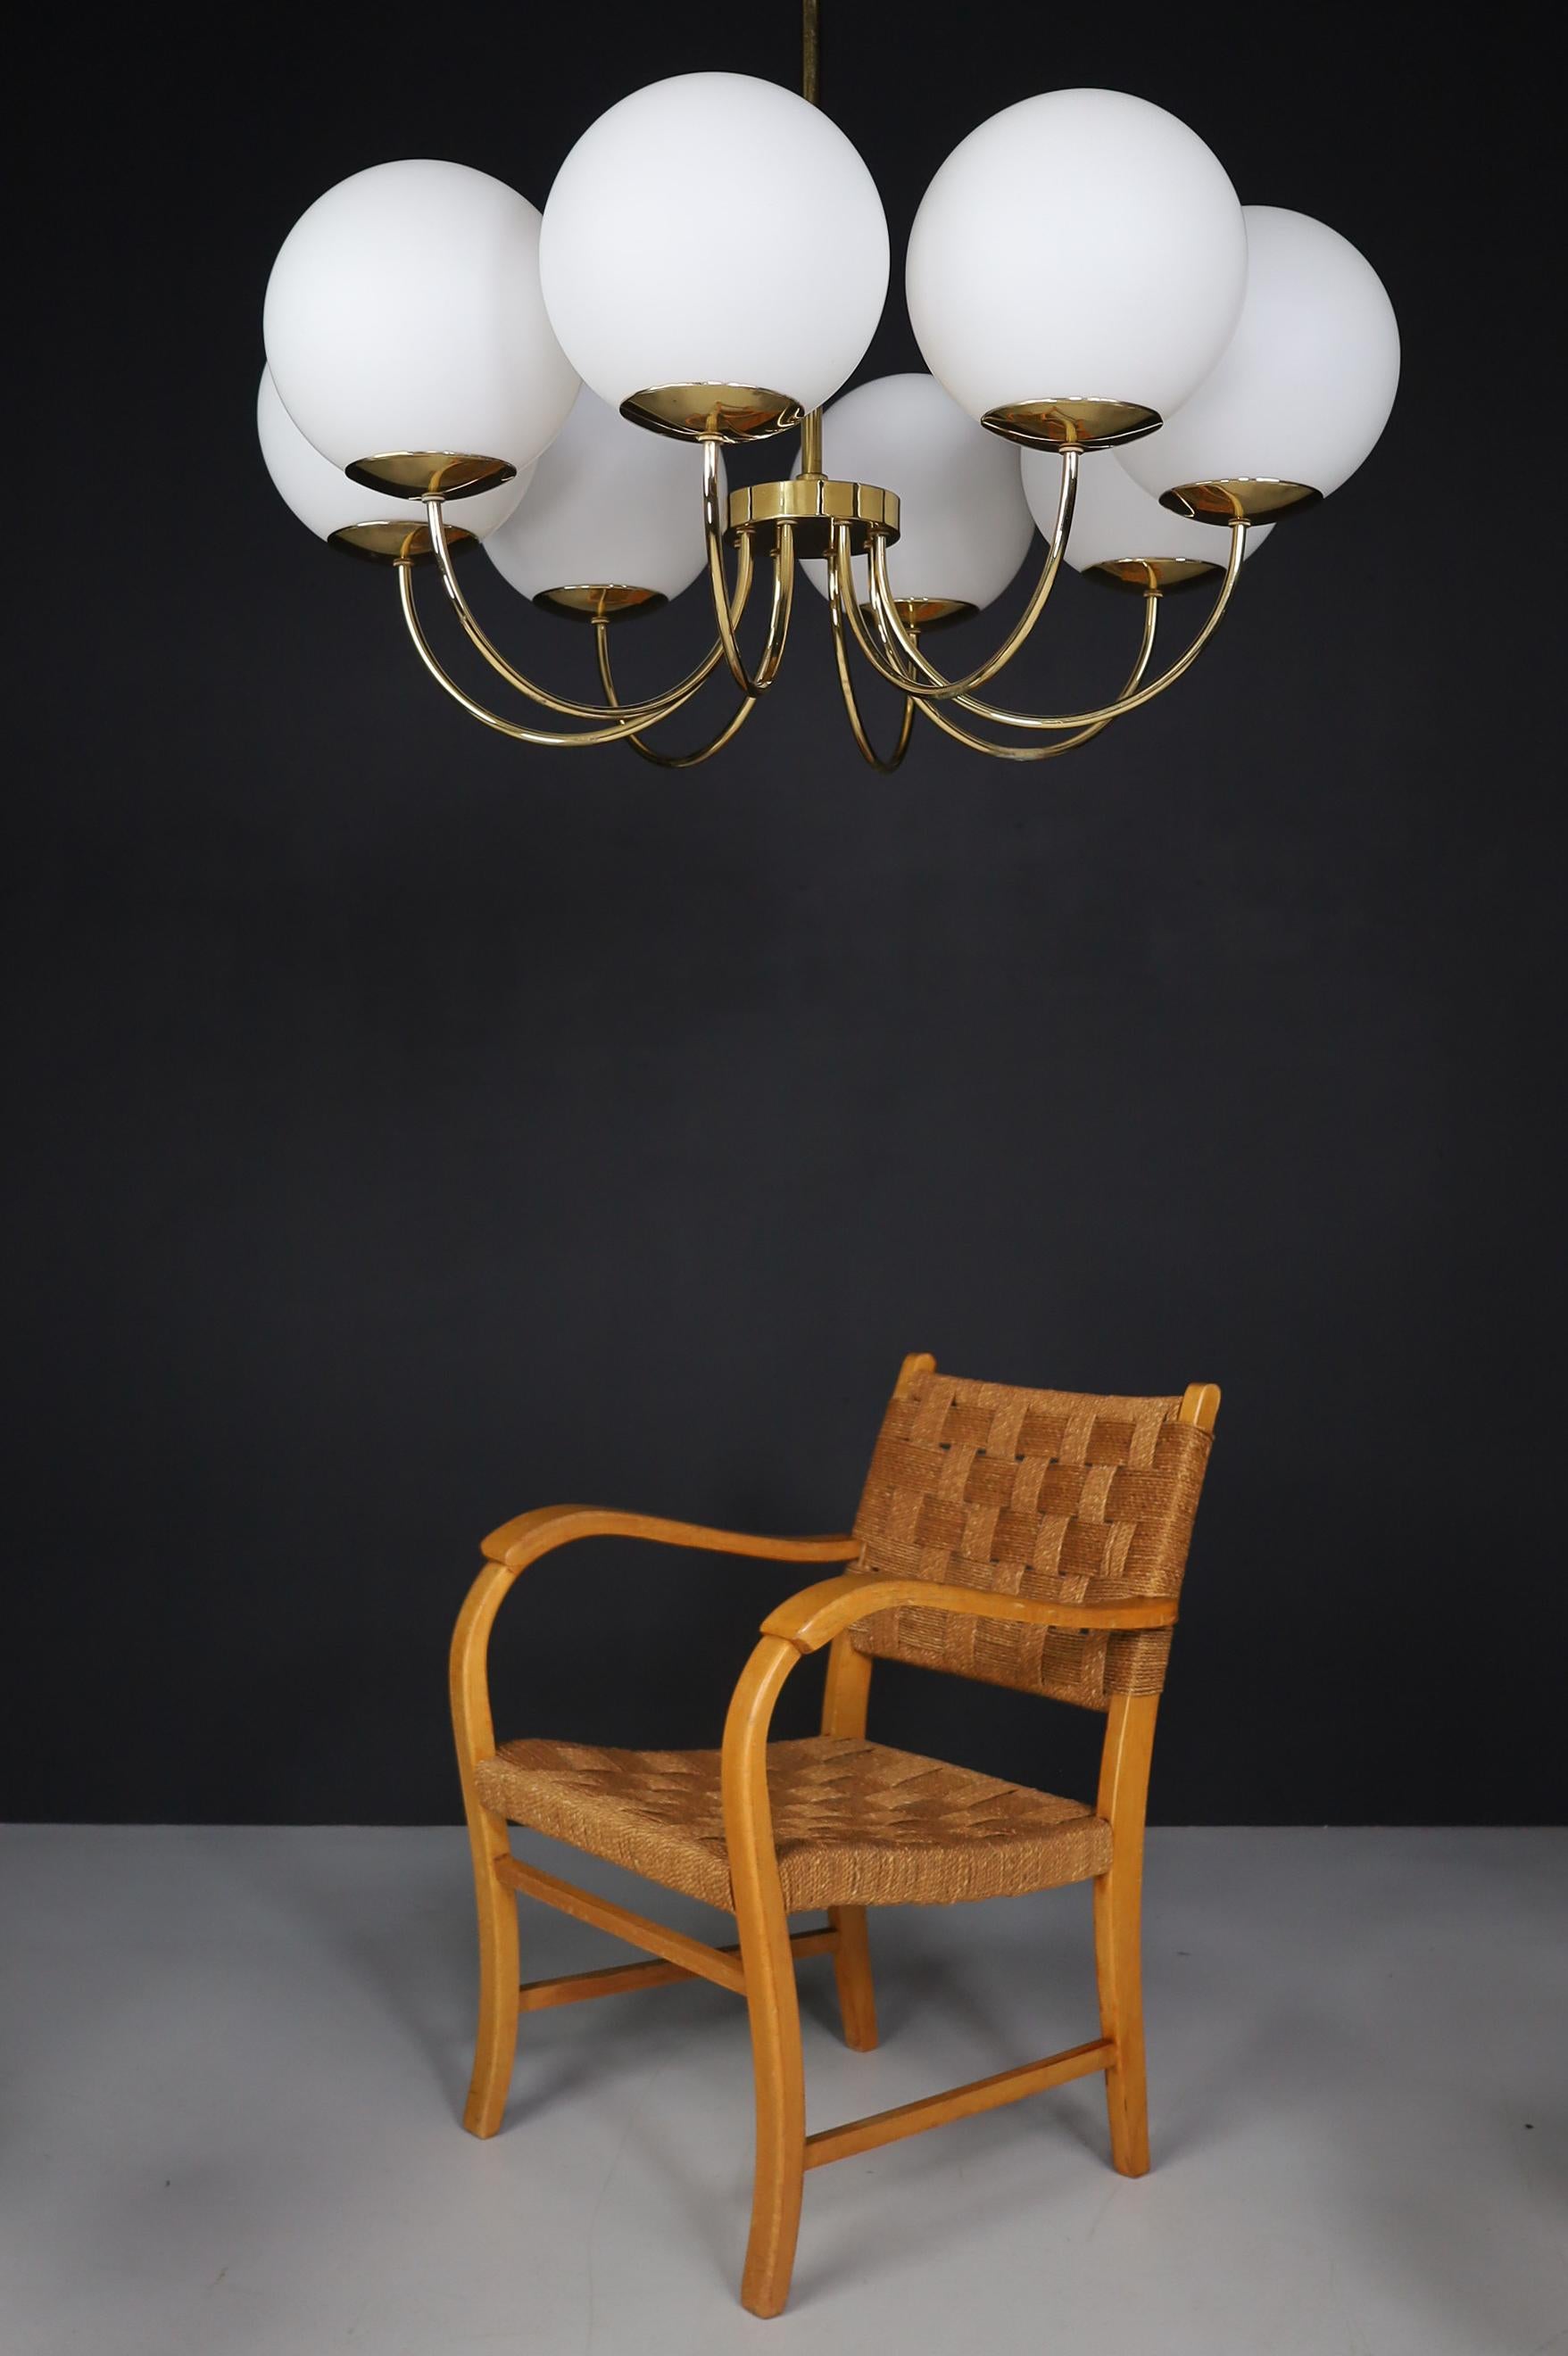 Italian 1 of 3 Elegant Chandeliers with Brass Fixture and Opaline Glass Globes, 1960s For Sale